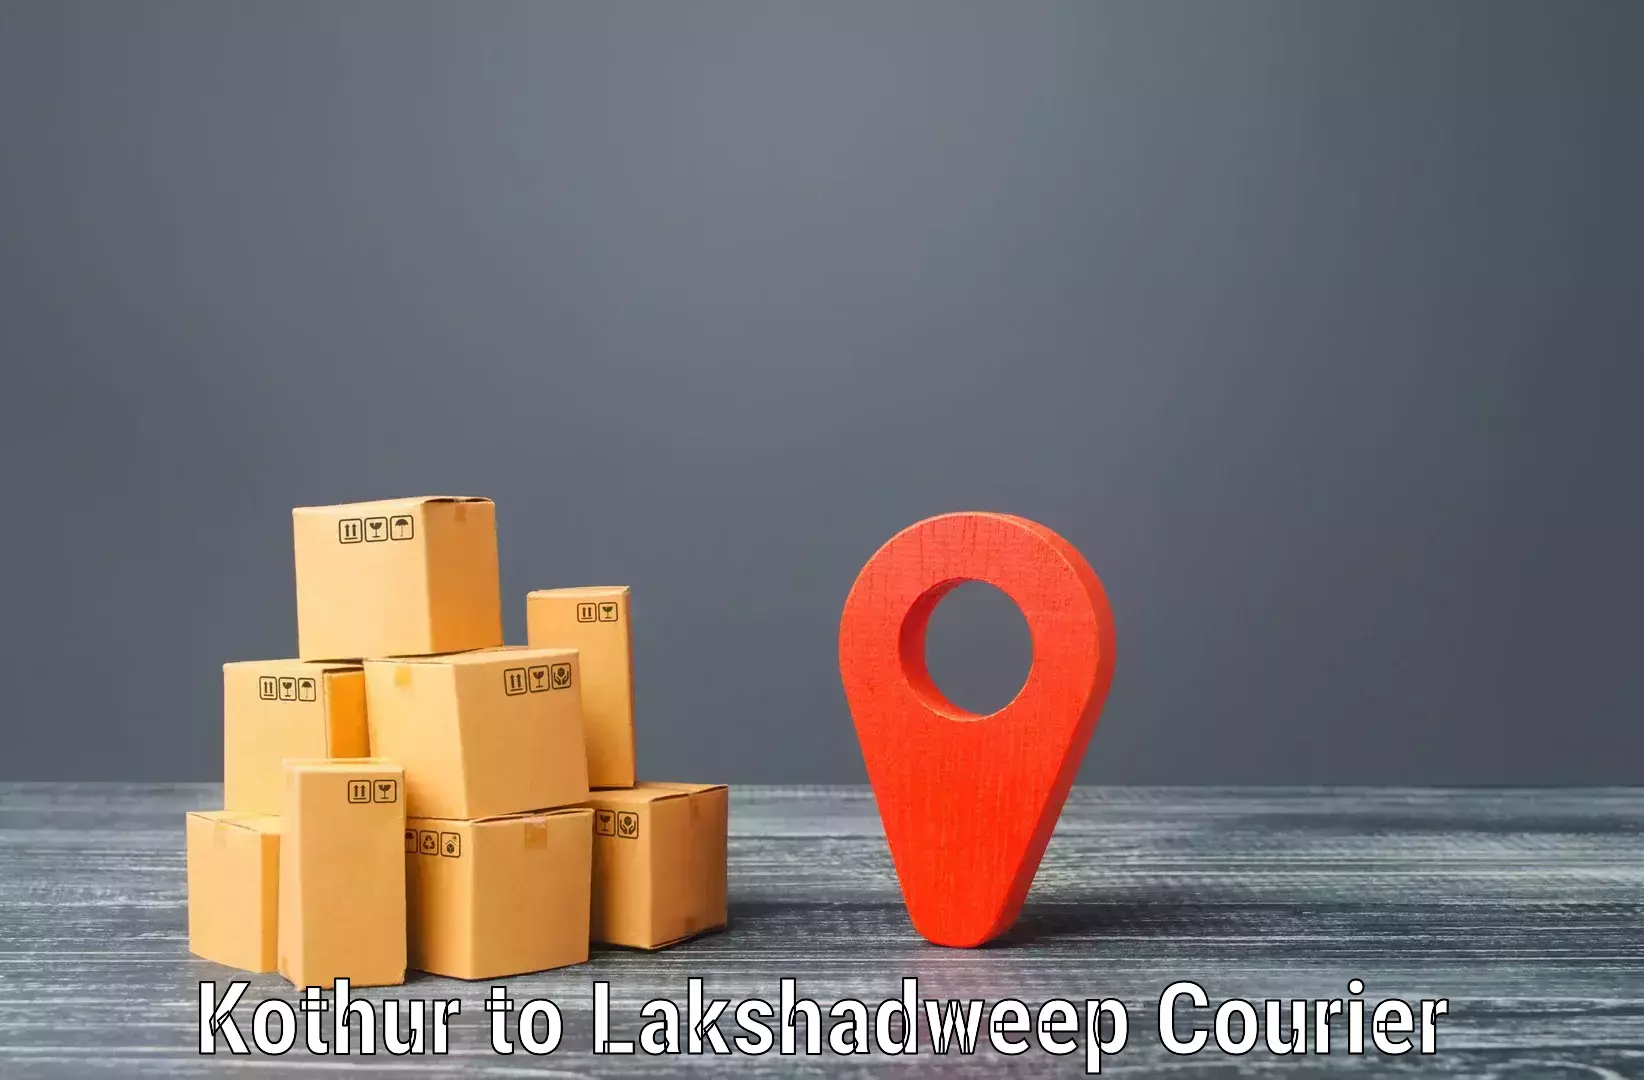 Customer-oriented courier services Kothur to Lakshadweep